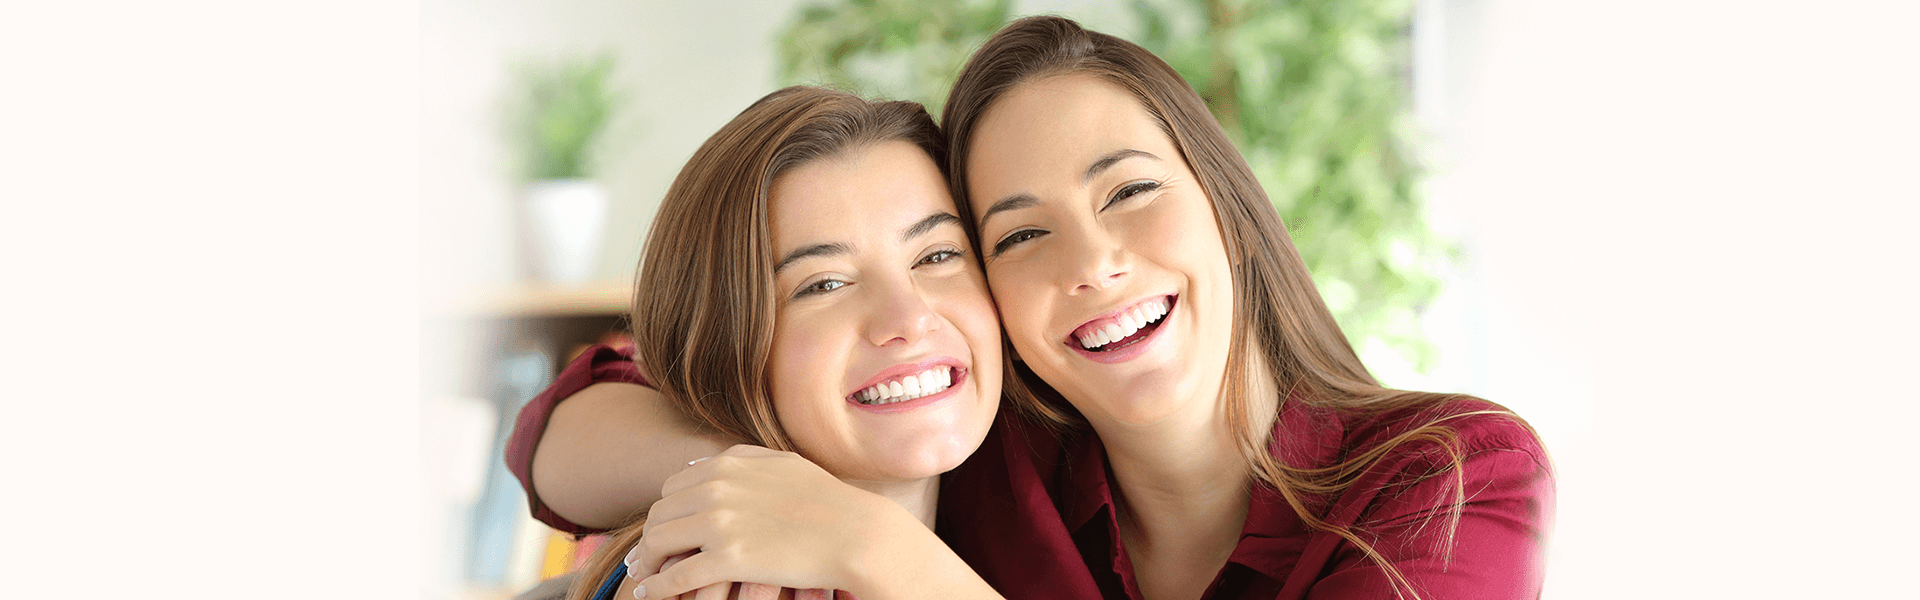 Teeth Bonding: What You Need to Know